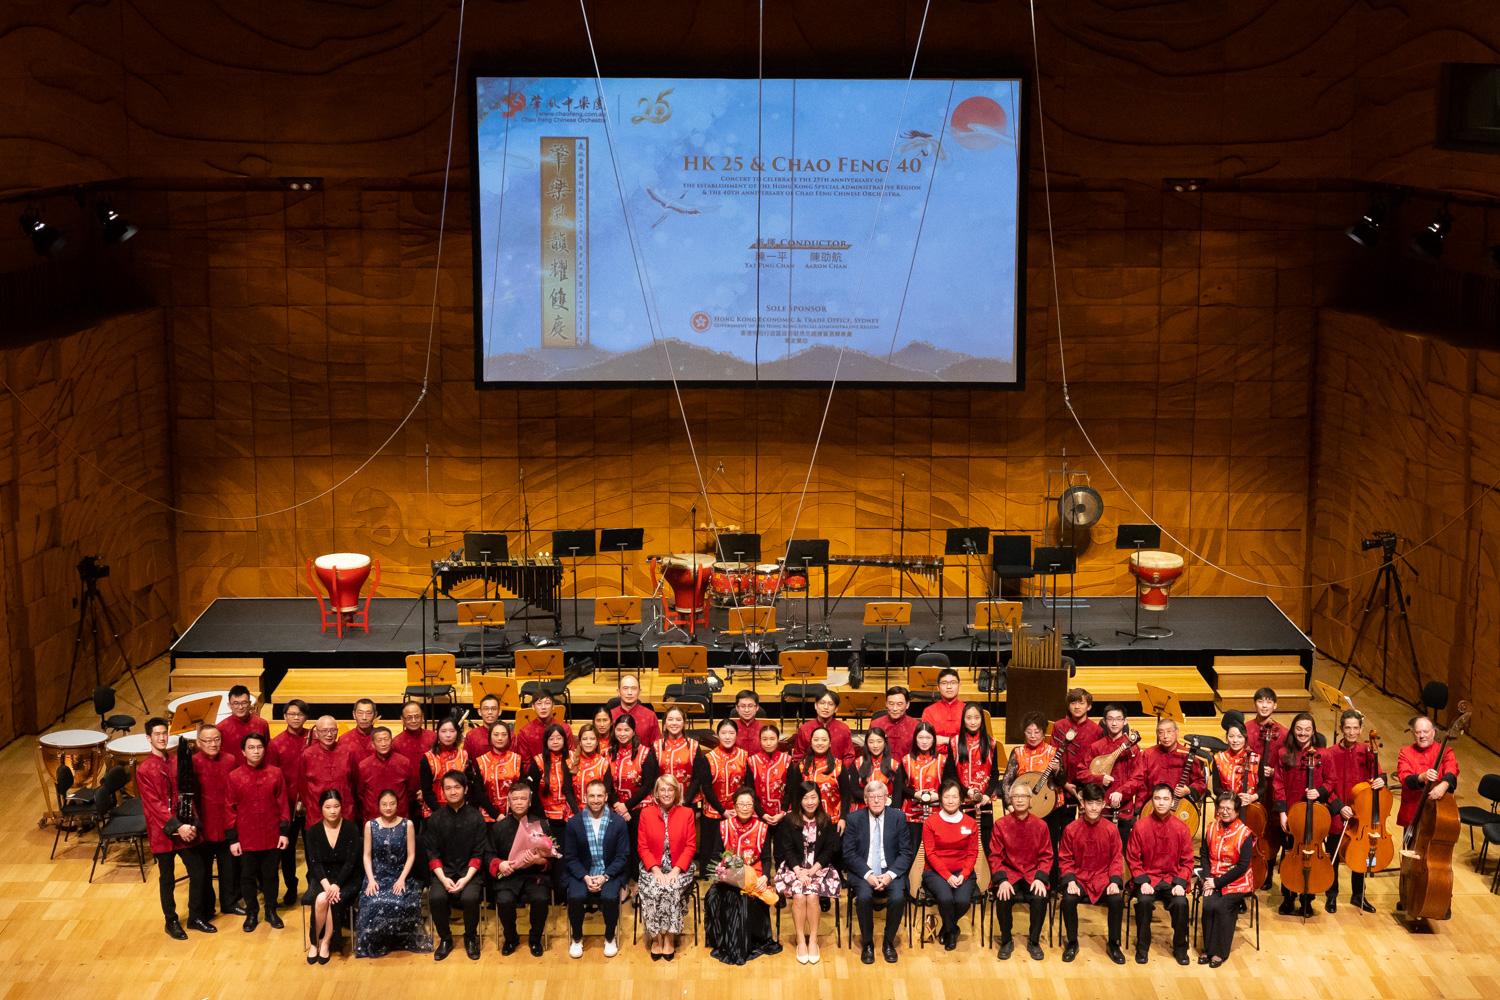 The Hong Kong Economic and Trade Office, Sydney (Sydney ETO), presented the "HK 25 & Chao Feng 40" Chinese music concert in Melbourne, Australia, yesterday (September 4) to celebrate the 25th anniversary of the establishment of the Hong Kong Special Administrative Region and promote traditional Chinese music. Photo shows the Lord Mayor of Melbourne, Ms Sally Capp (first row, sixth left); the Director of the Sydney ETO, Miss Trista Lim (first row, seventh right); and Member of the Victorian Legislative Council Mr Bruce Atkinson (first row, sixth right), with other guests and Chao Feng Chinese Orchestra.